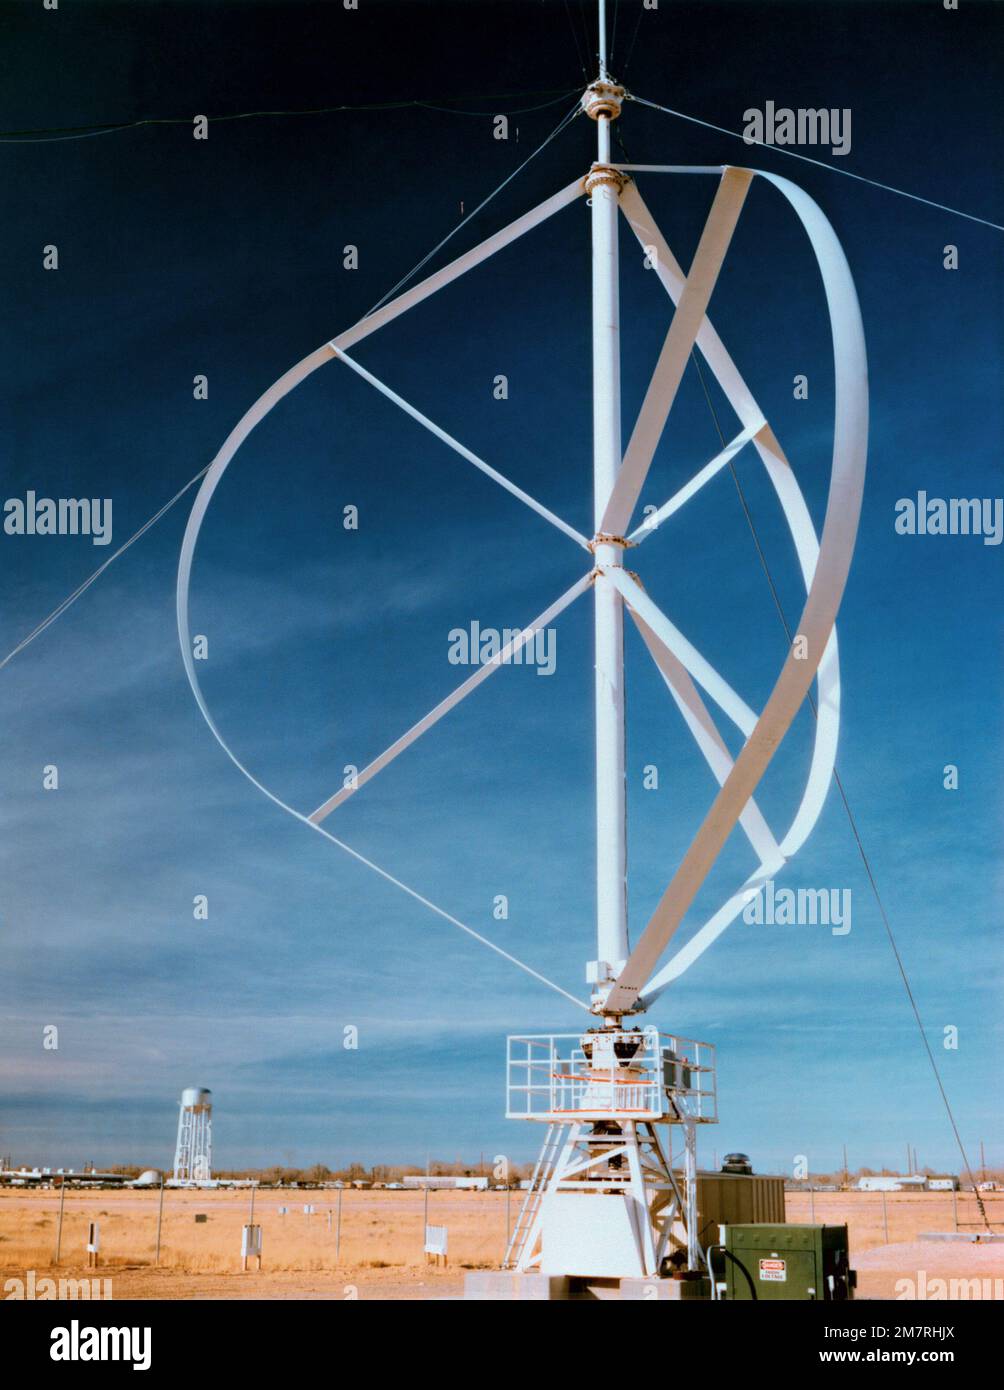 A view of a vertical axis wind turbine of the Darrieus design. This machine is 17 meters high and produces up to 150 kilowatts of wind power. State: New Mexico (NM) Country: United States Of America (USA) Stock Photo